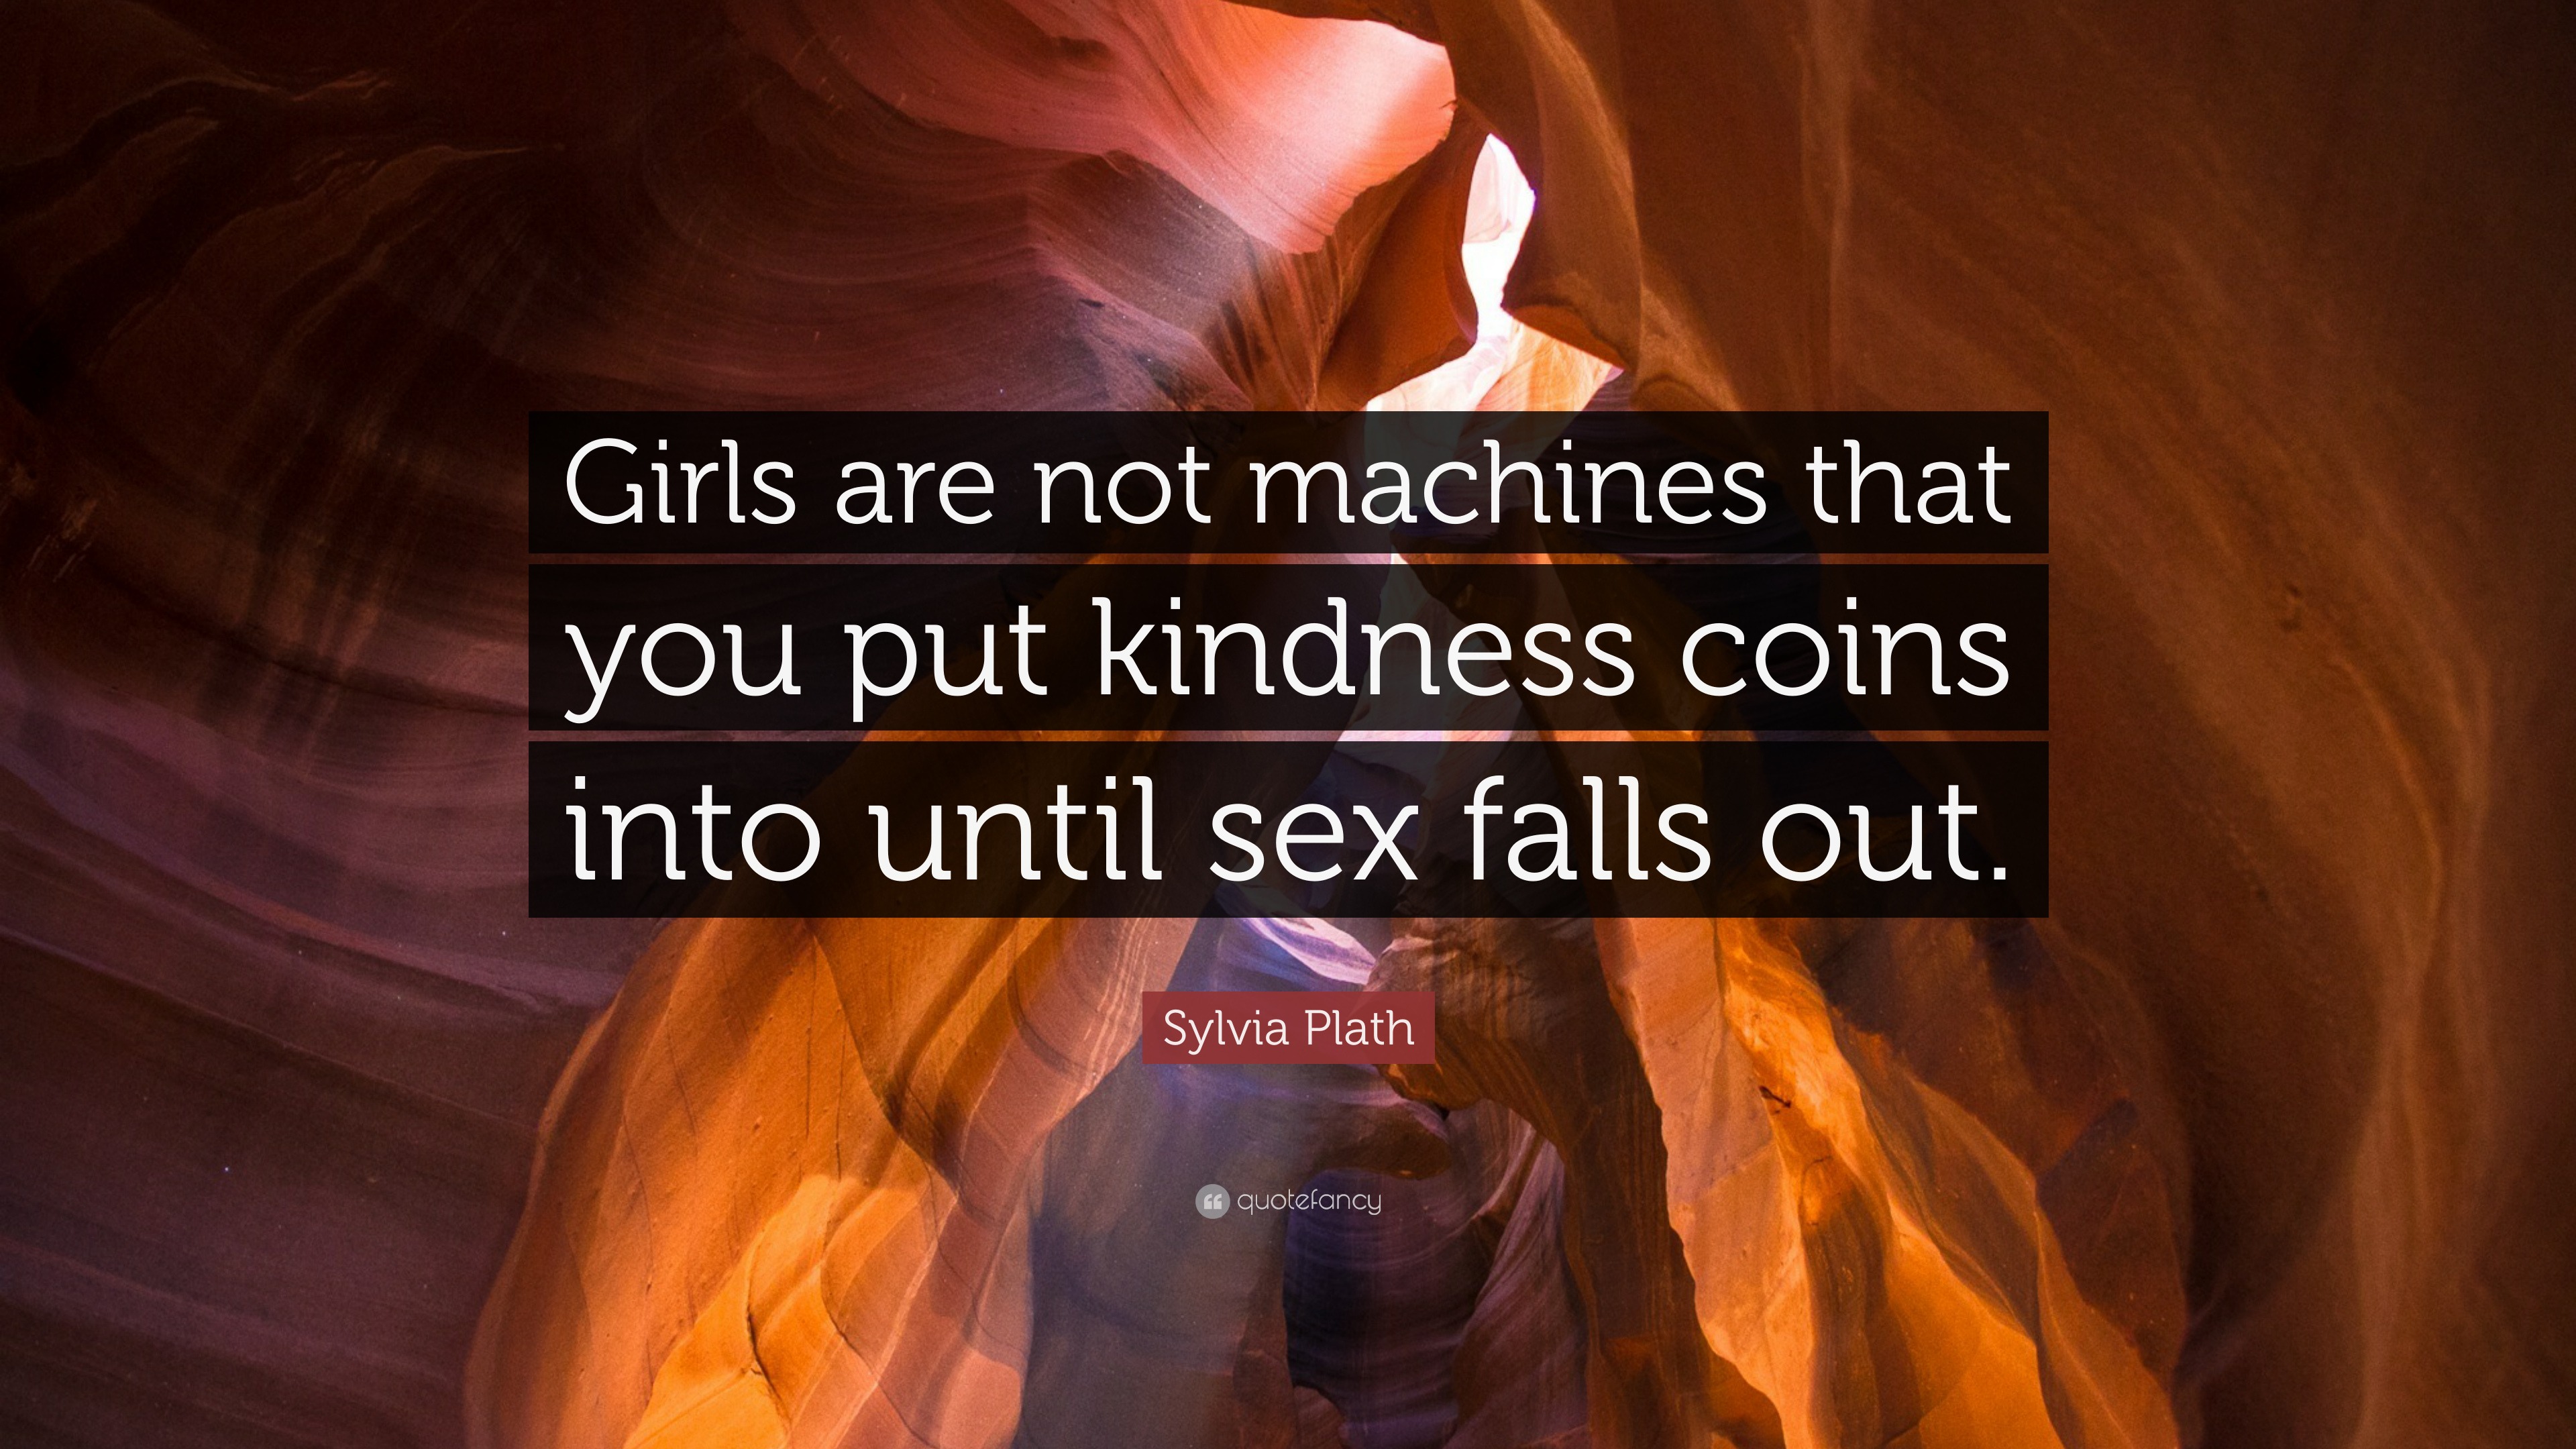 Sylvia Plath Quote “girls Are Not Machines That You Put Kindness Coins